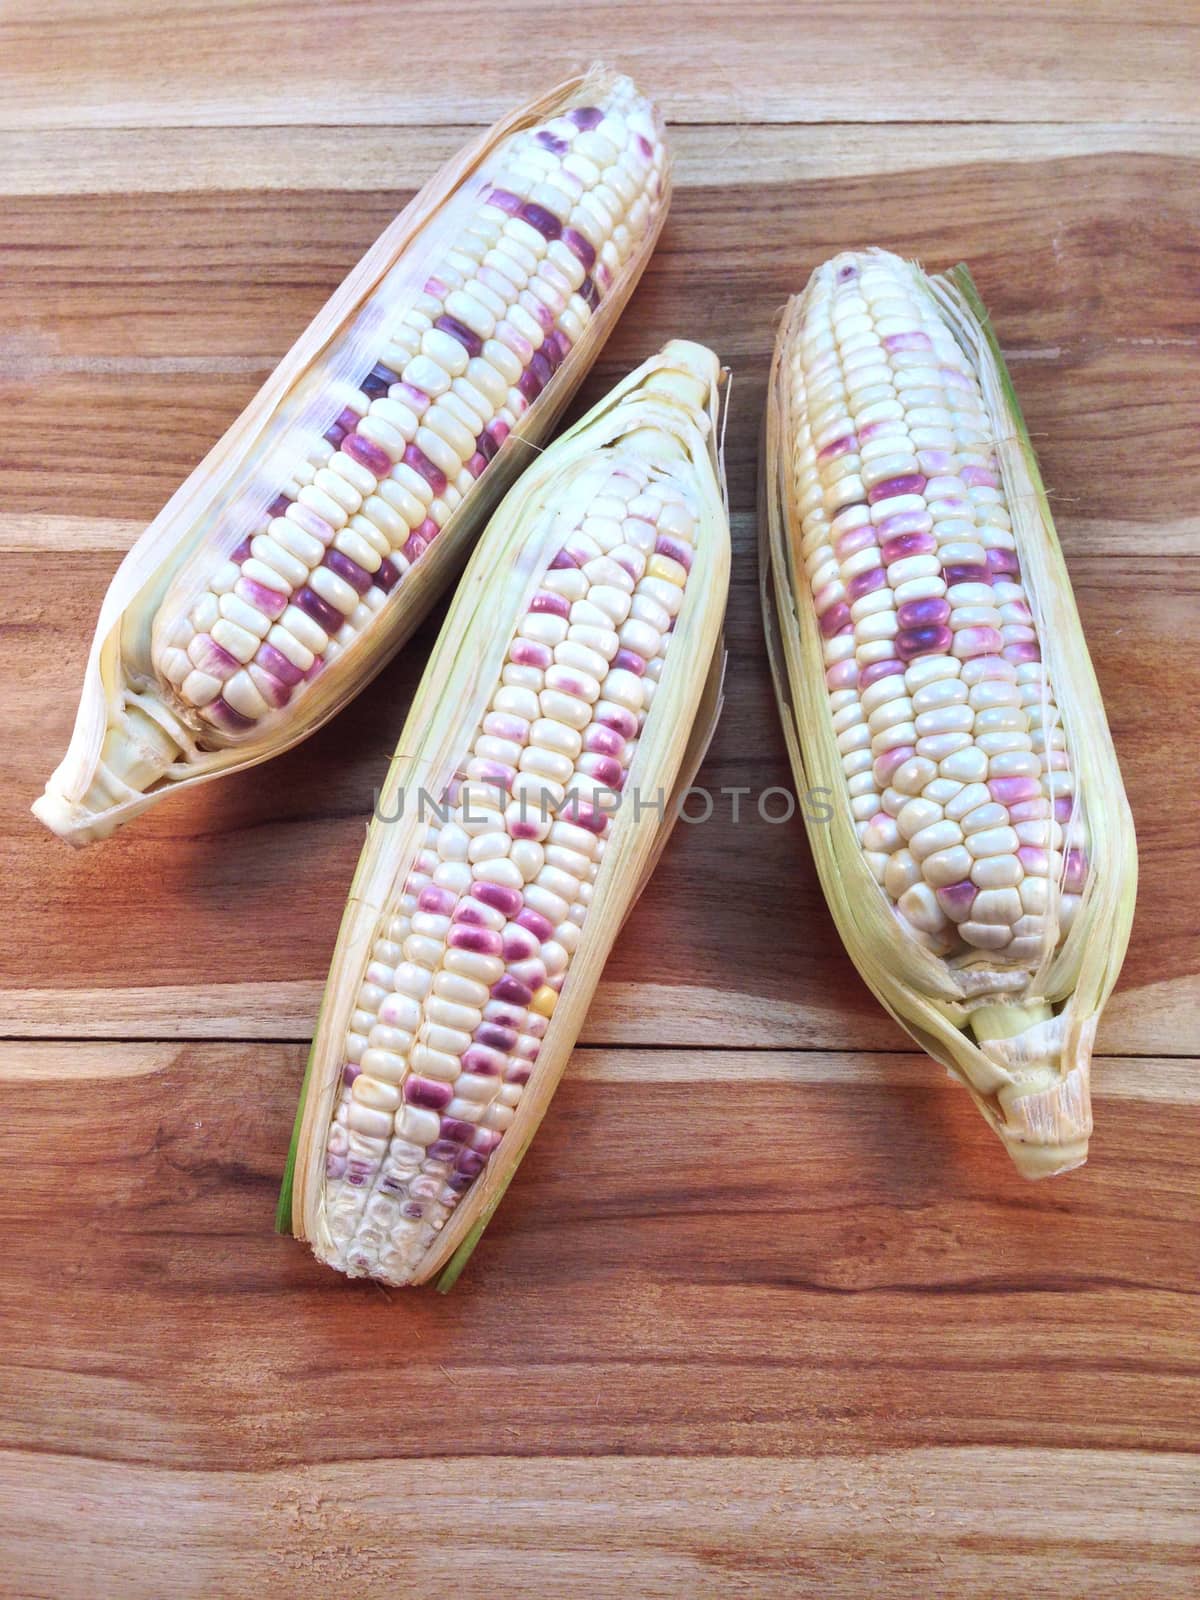 White and purple corn  on wooden background